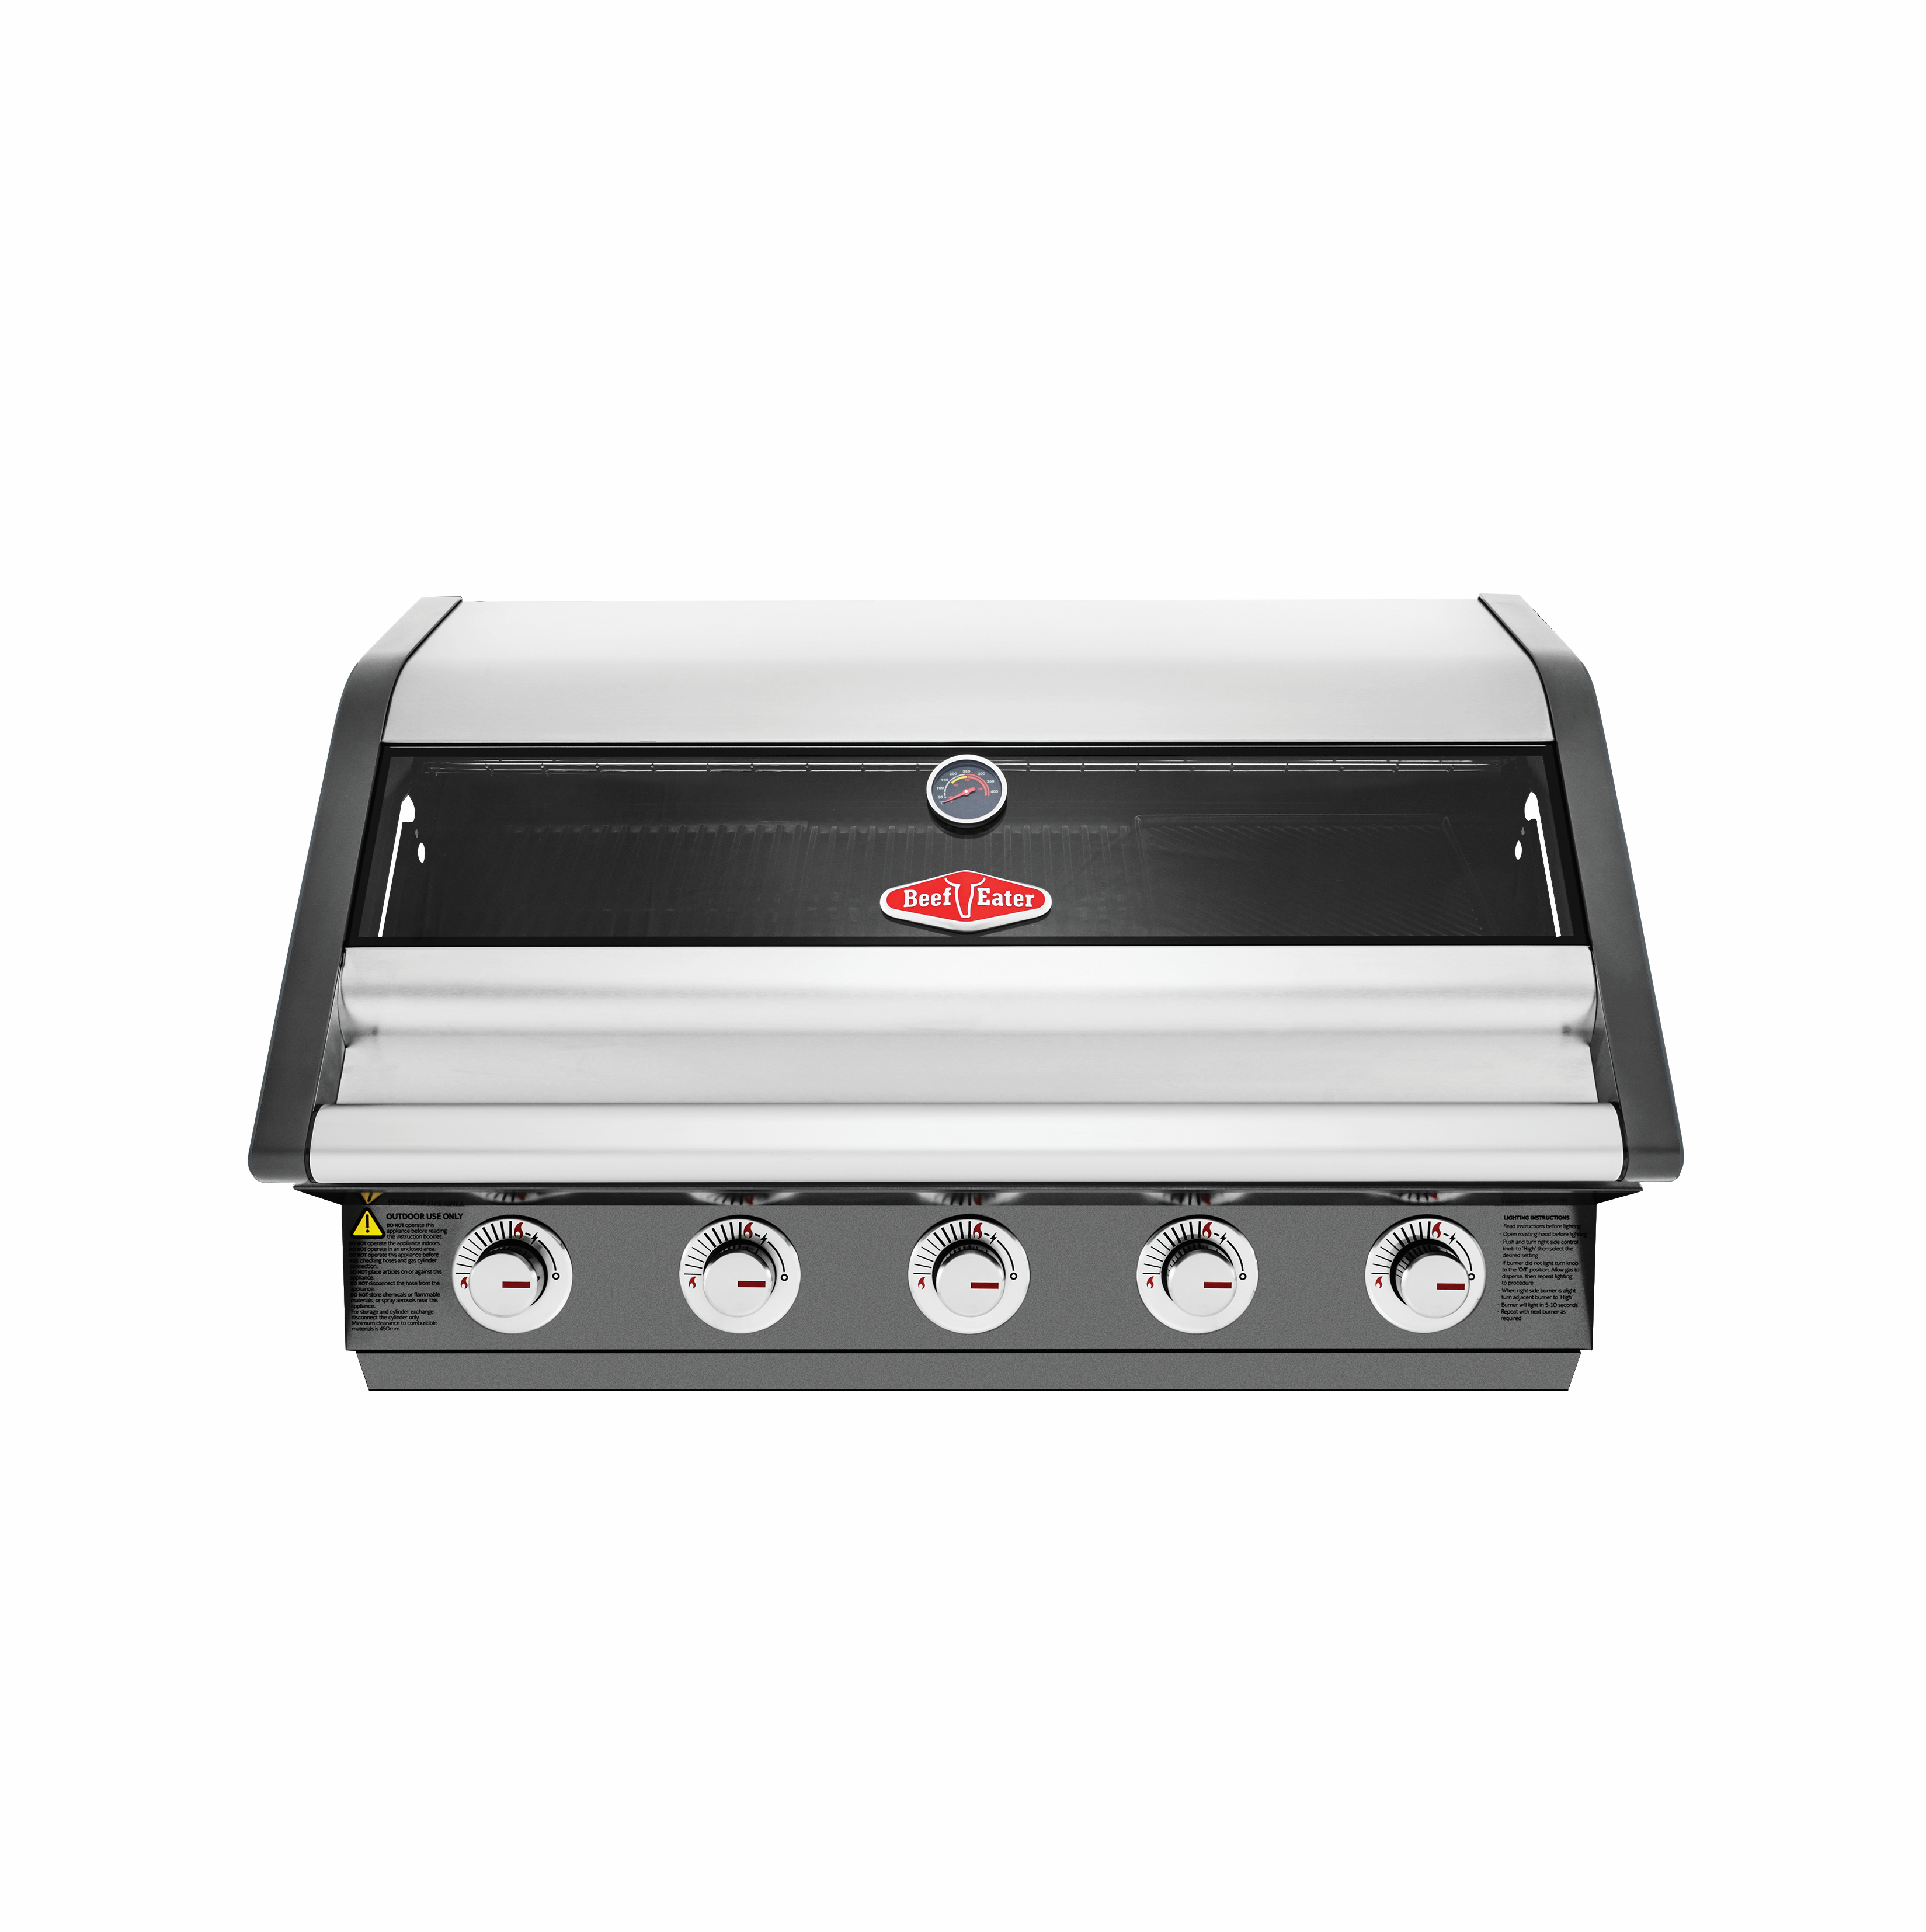 BeefEater - 1600E Series 5 Burner Built In Barbecue